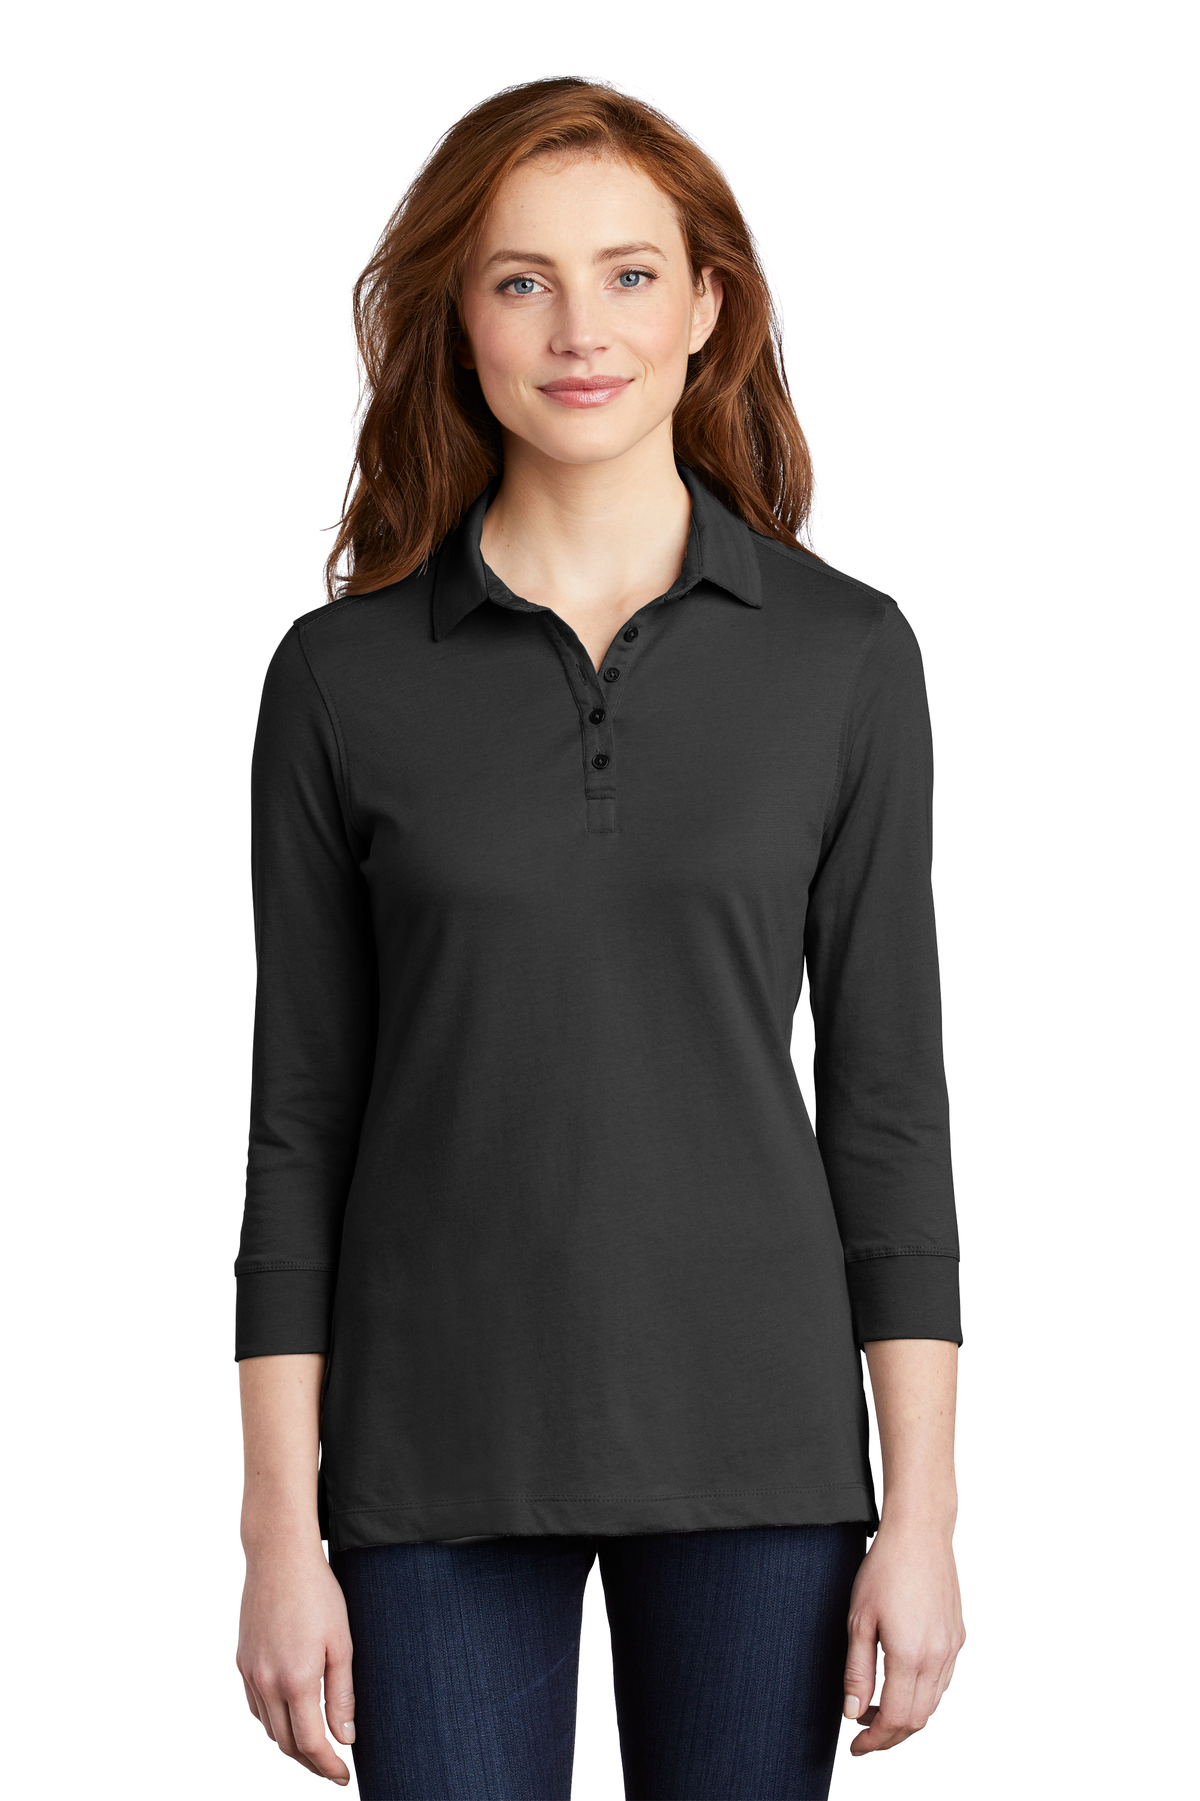 Port Authority Ladies 3/4-Sleeve Meridian Cotton Blend Polo | Product ...